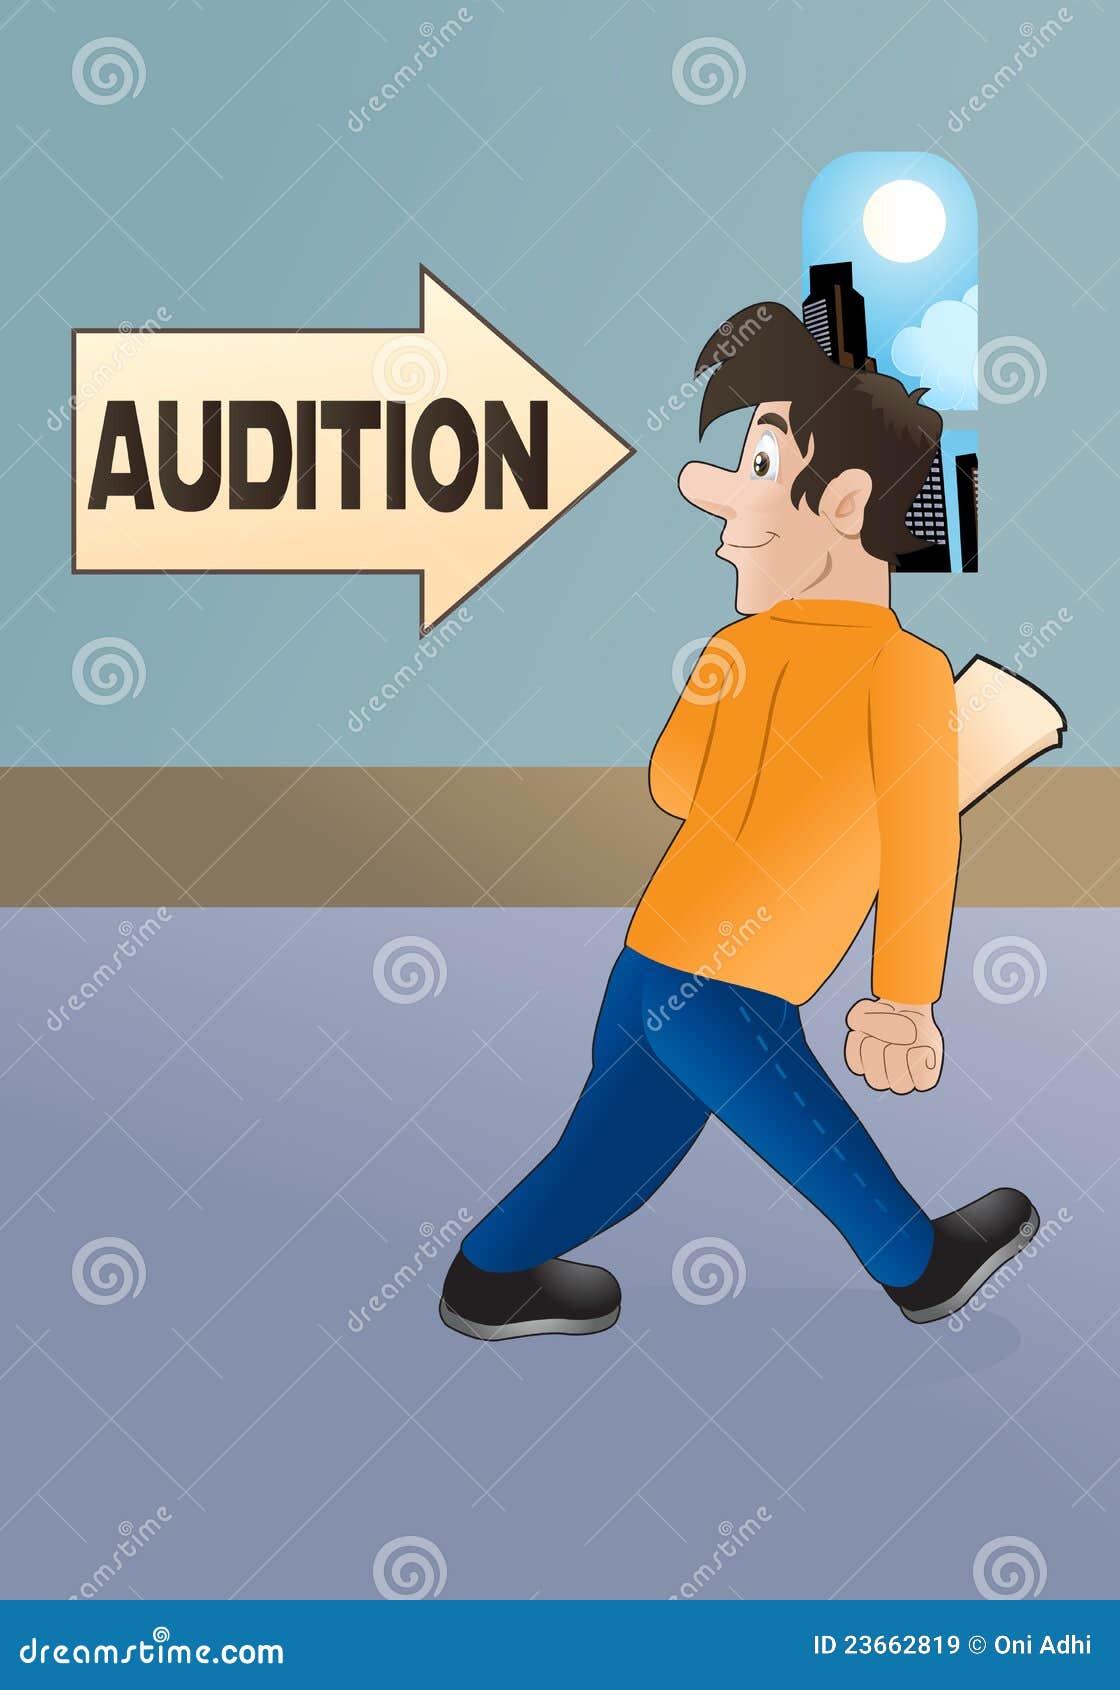 going into audition